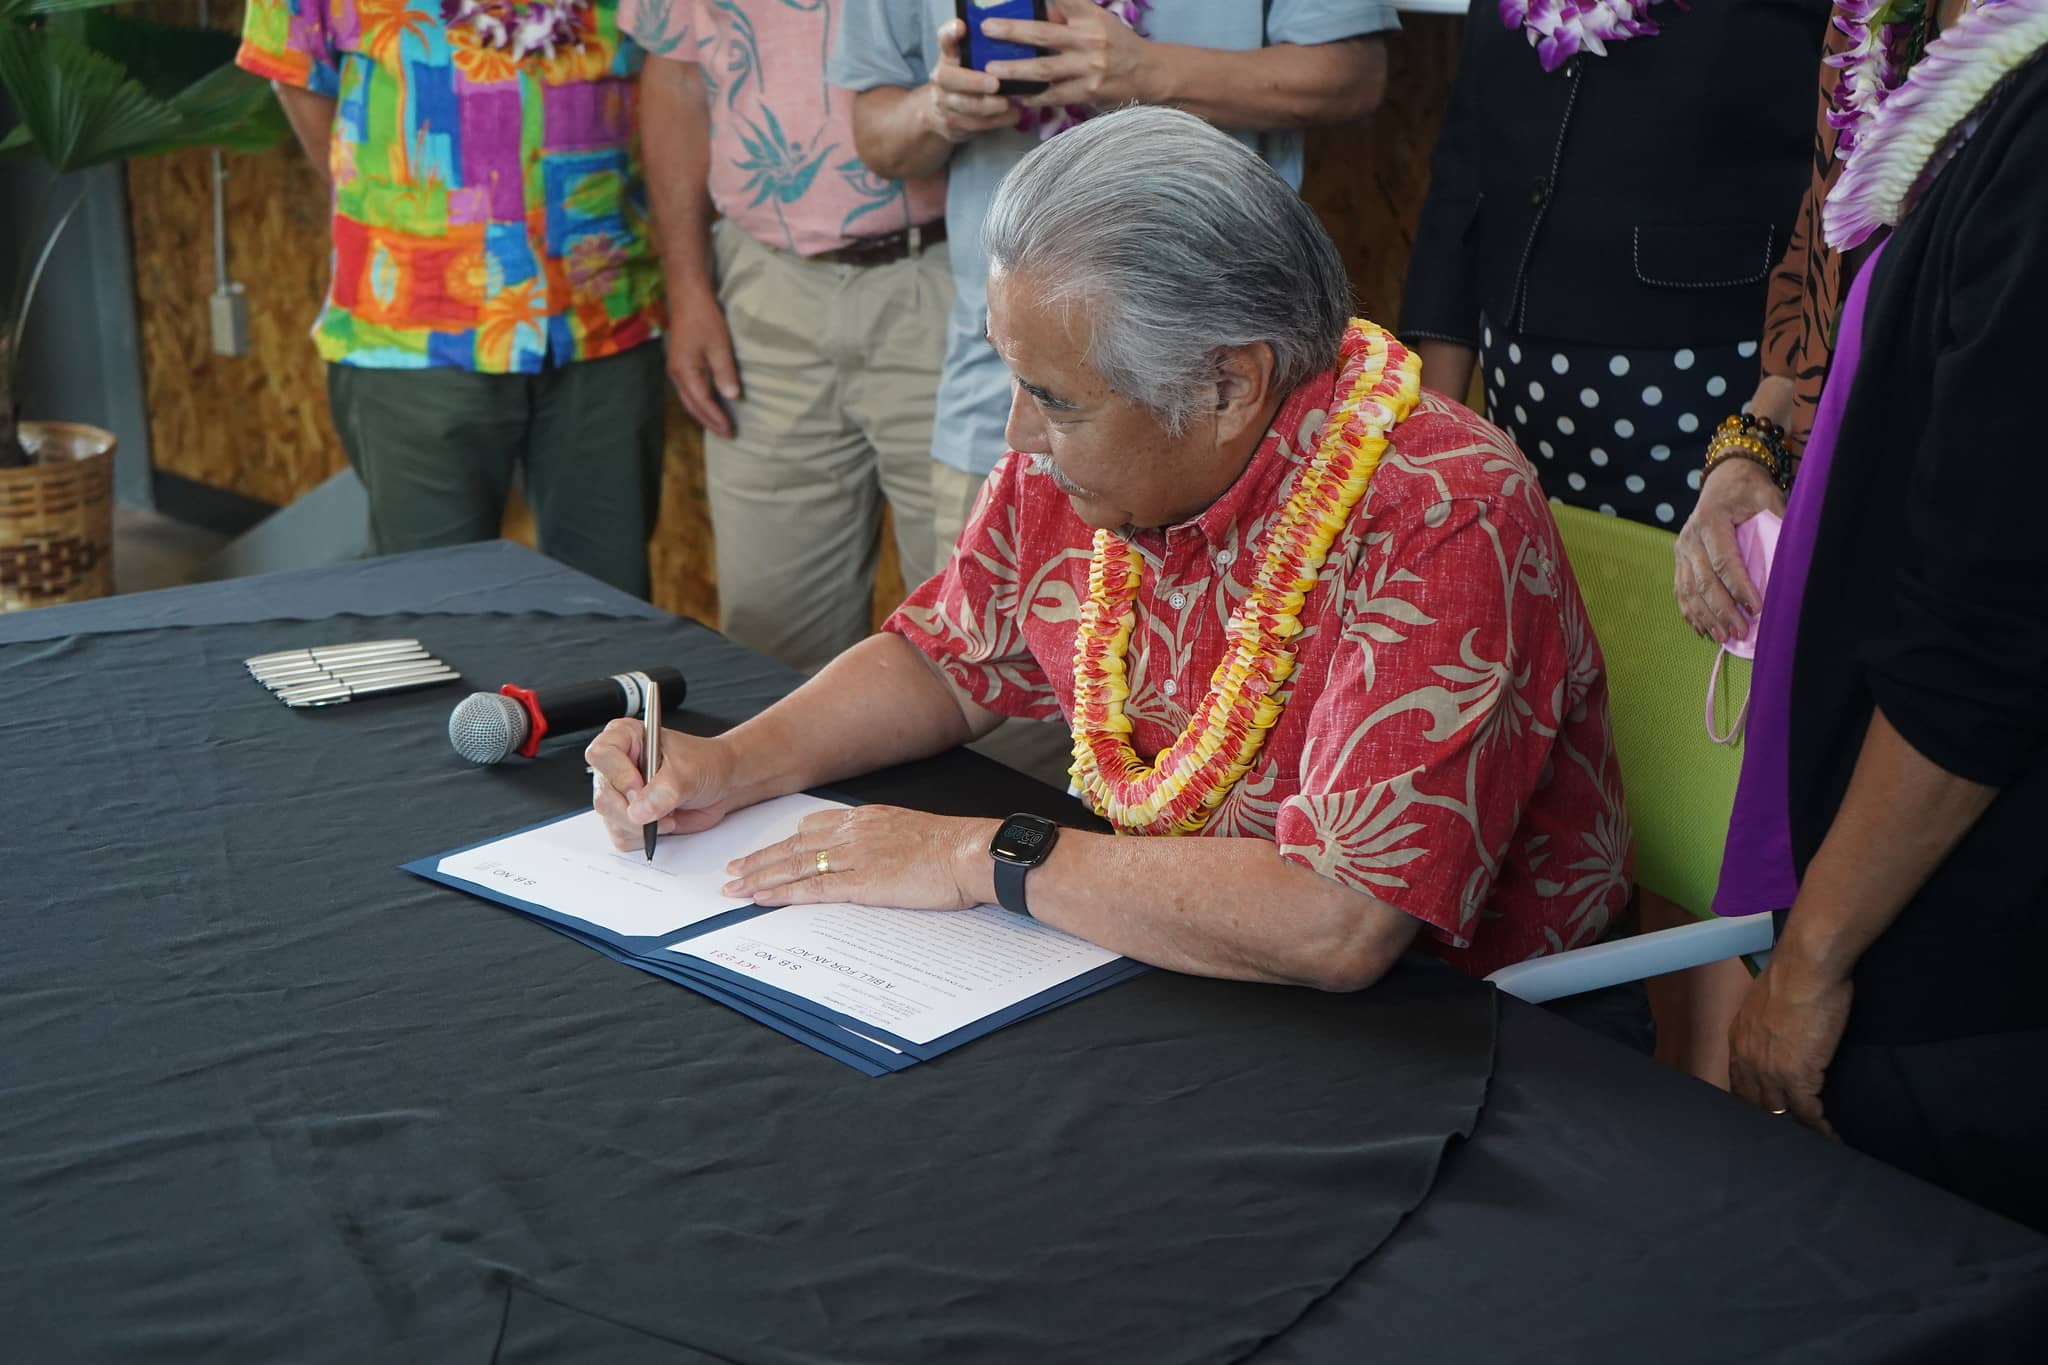 david-ige-biography-facts-childhood-family-life-achievements-of